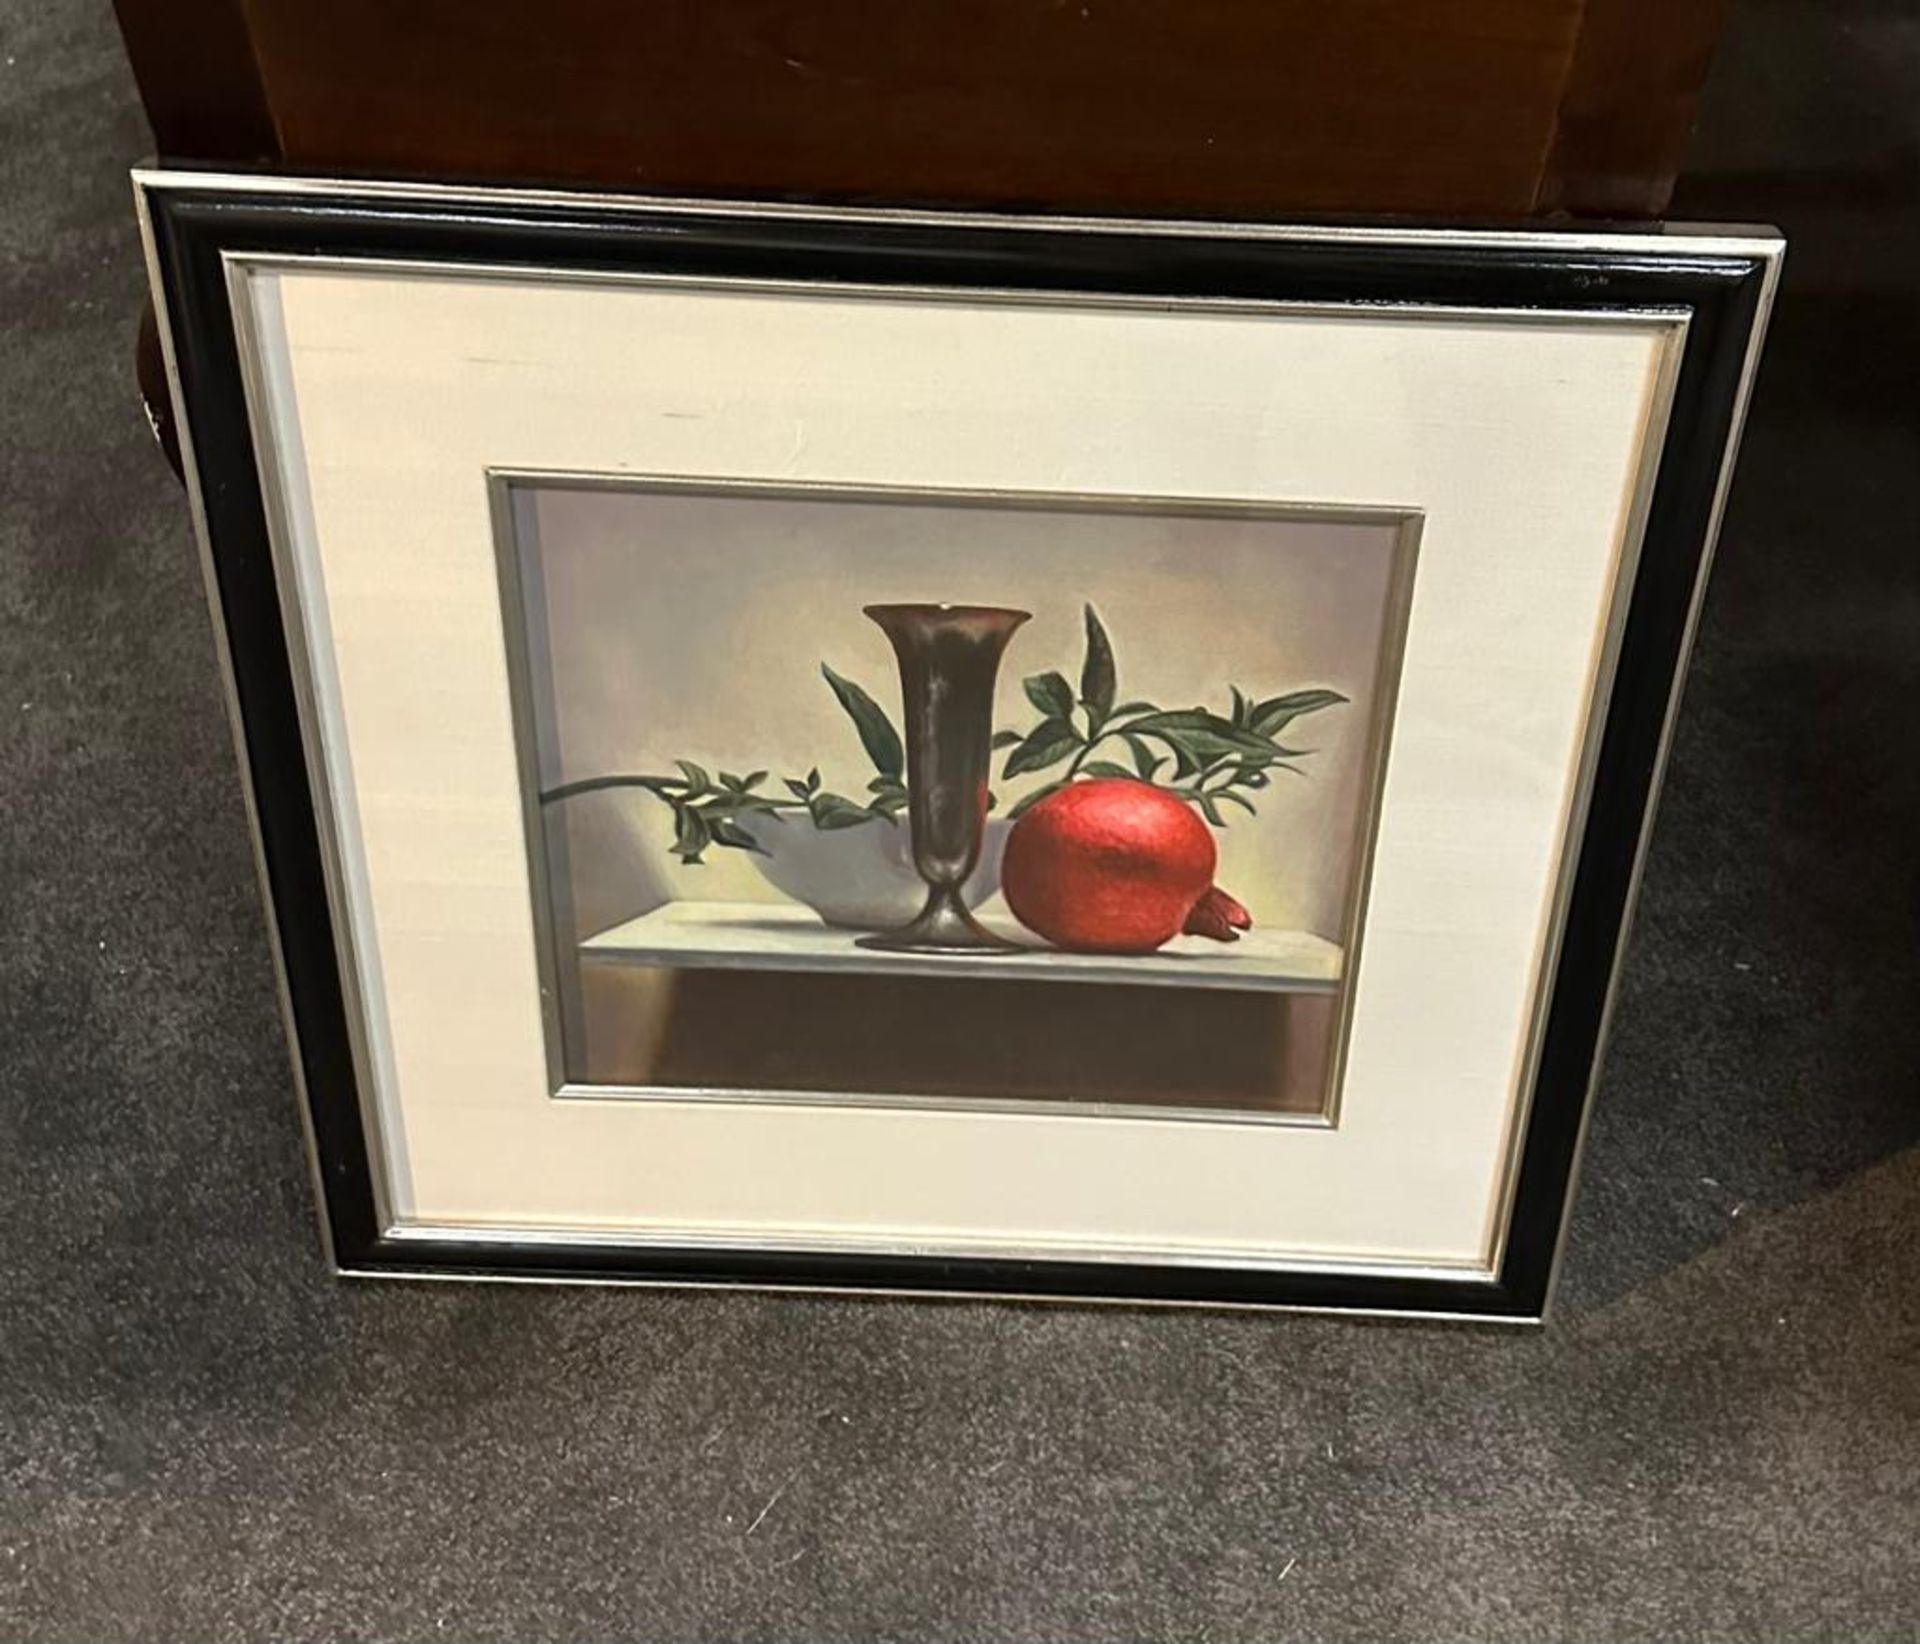 3x Untitled Framed Still Life Lithograph Prints 60 x 50cm - Image 3 of 3